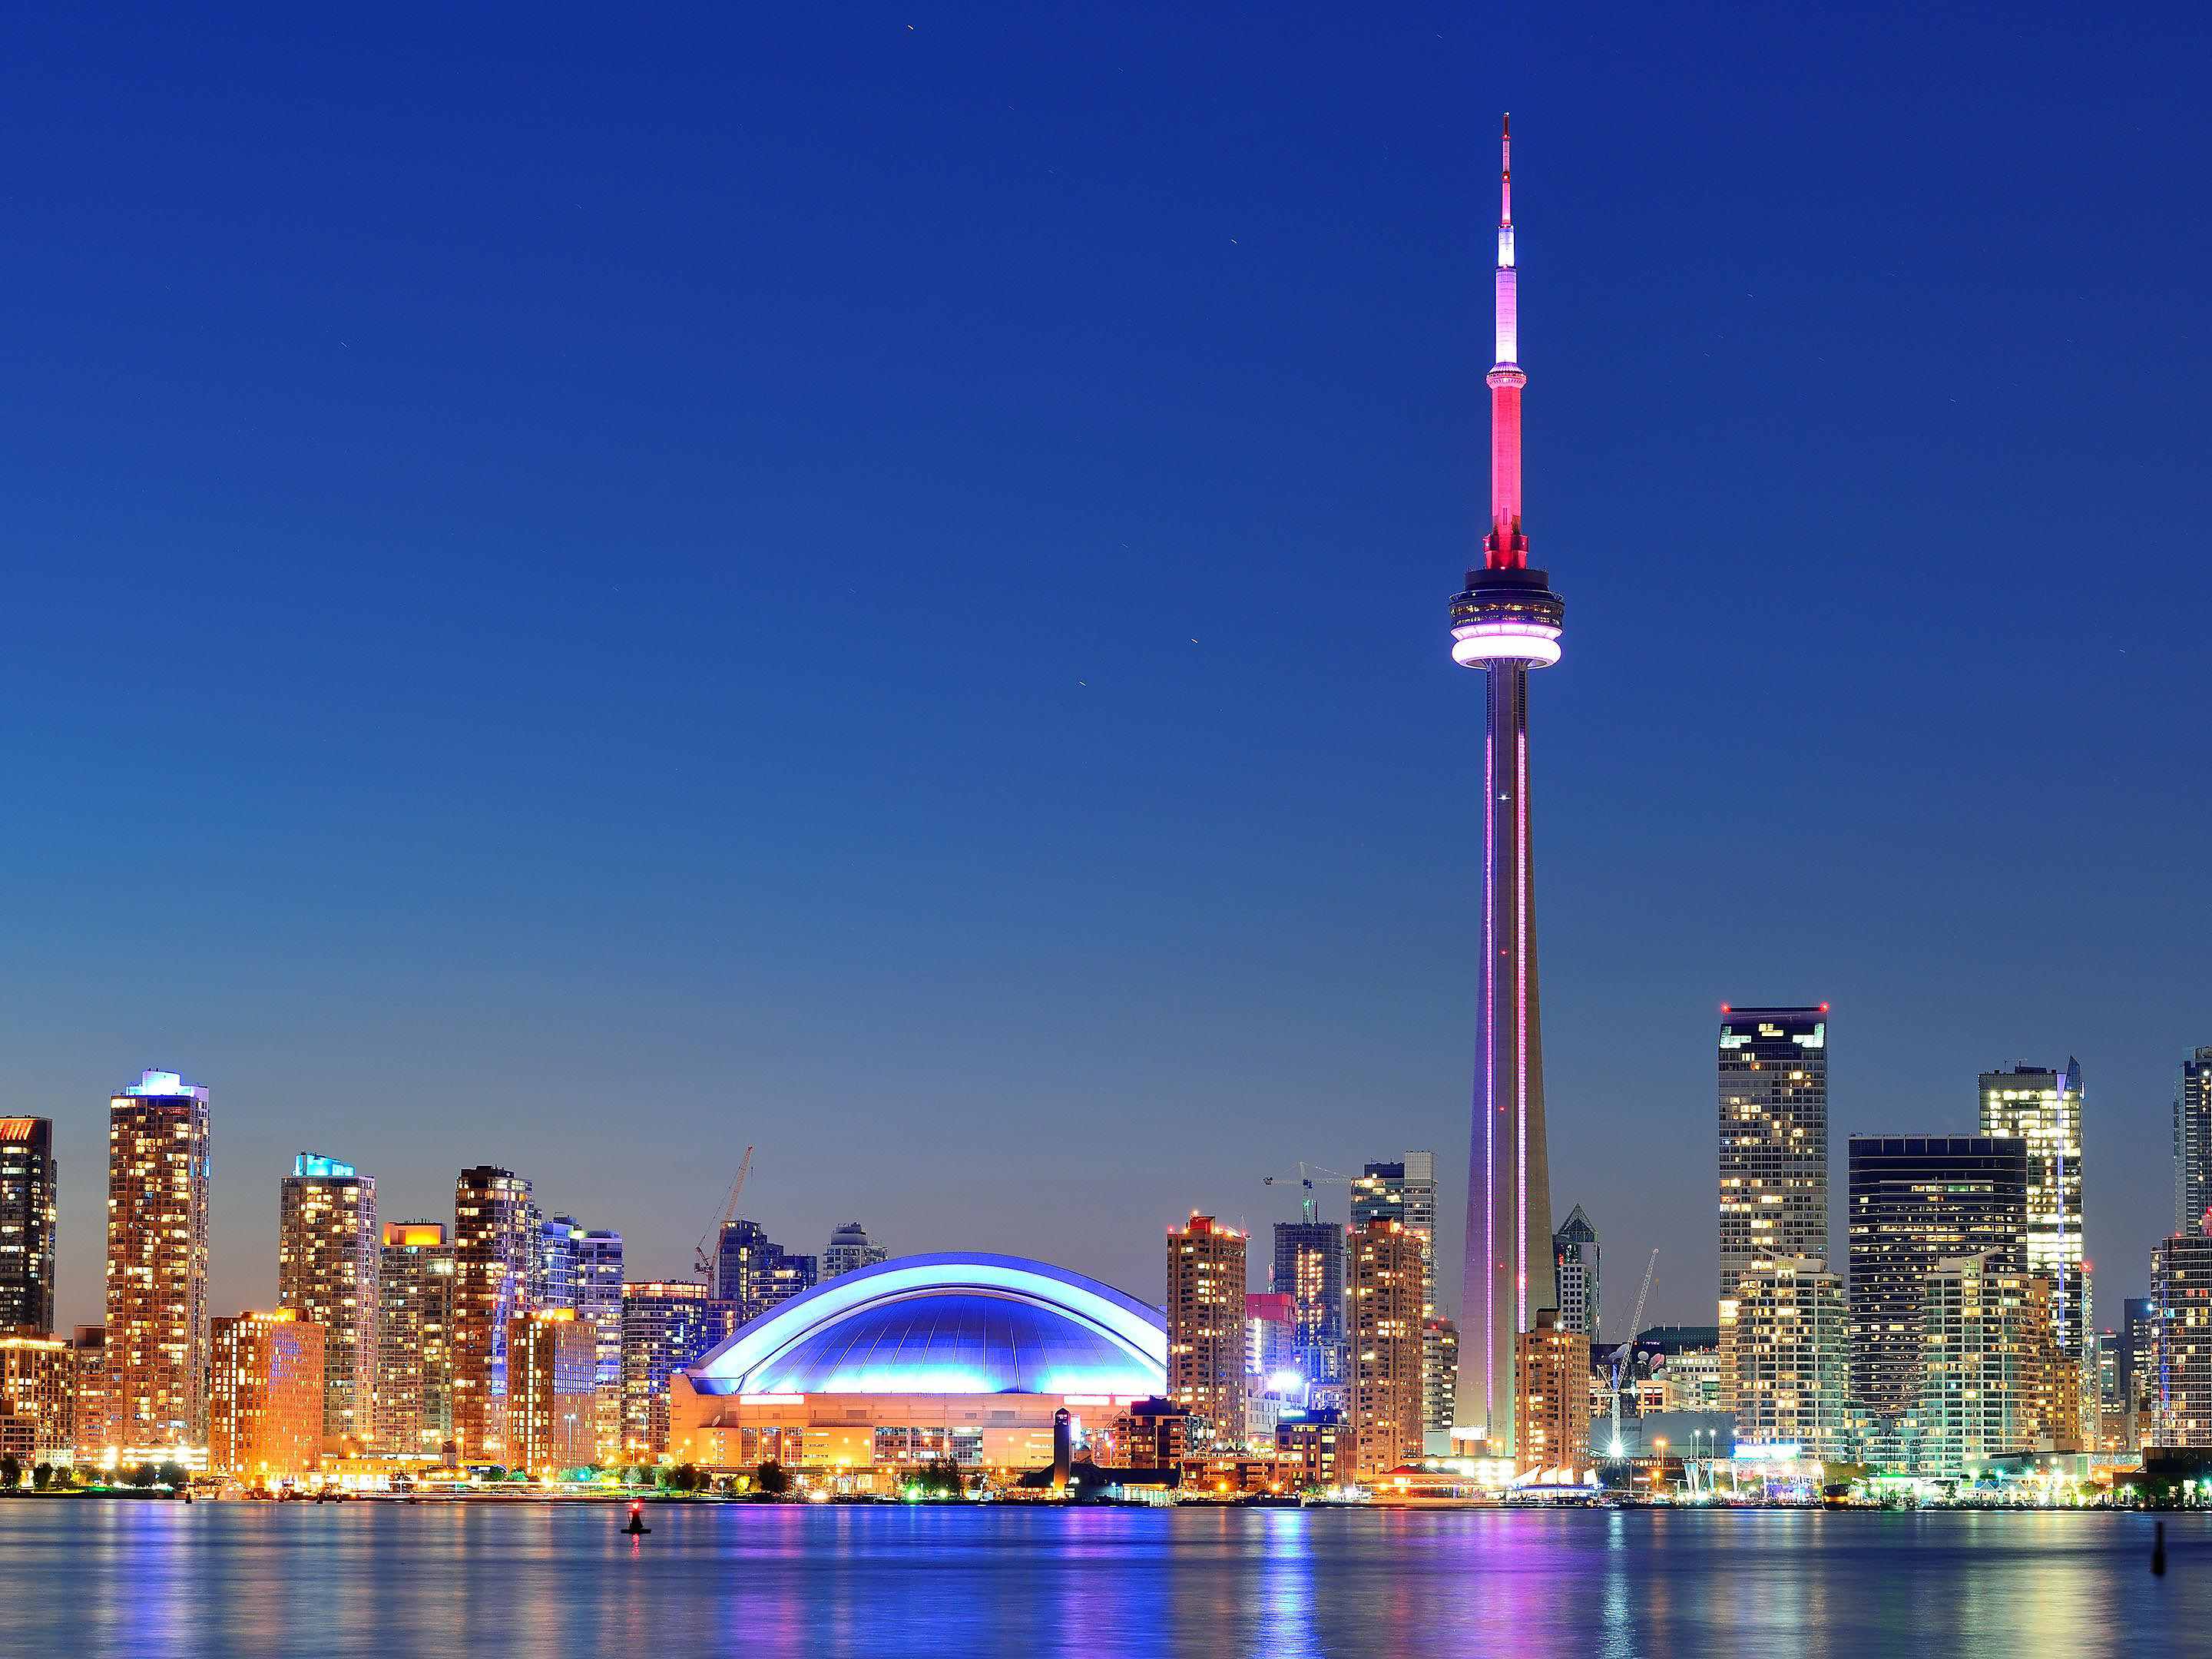 Experience what makes Toronto unforgettable!